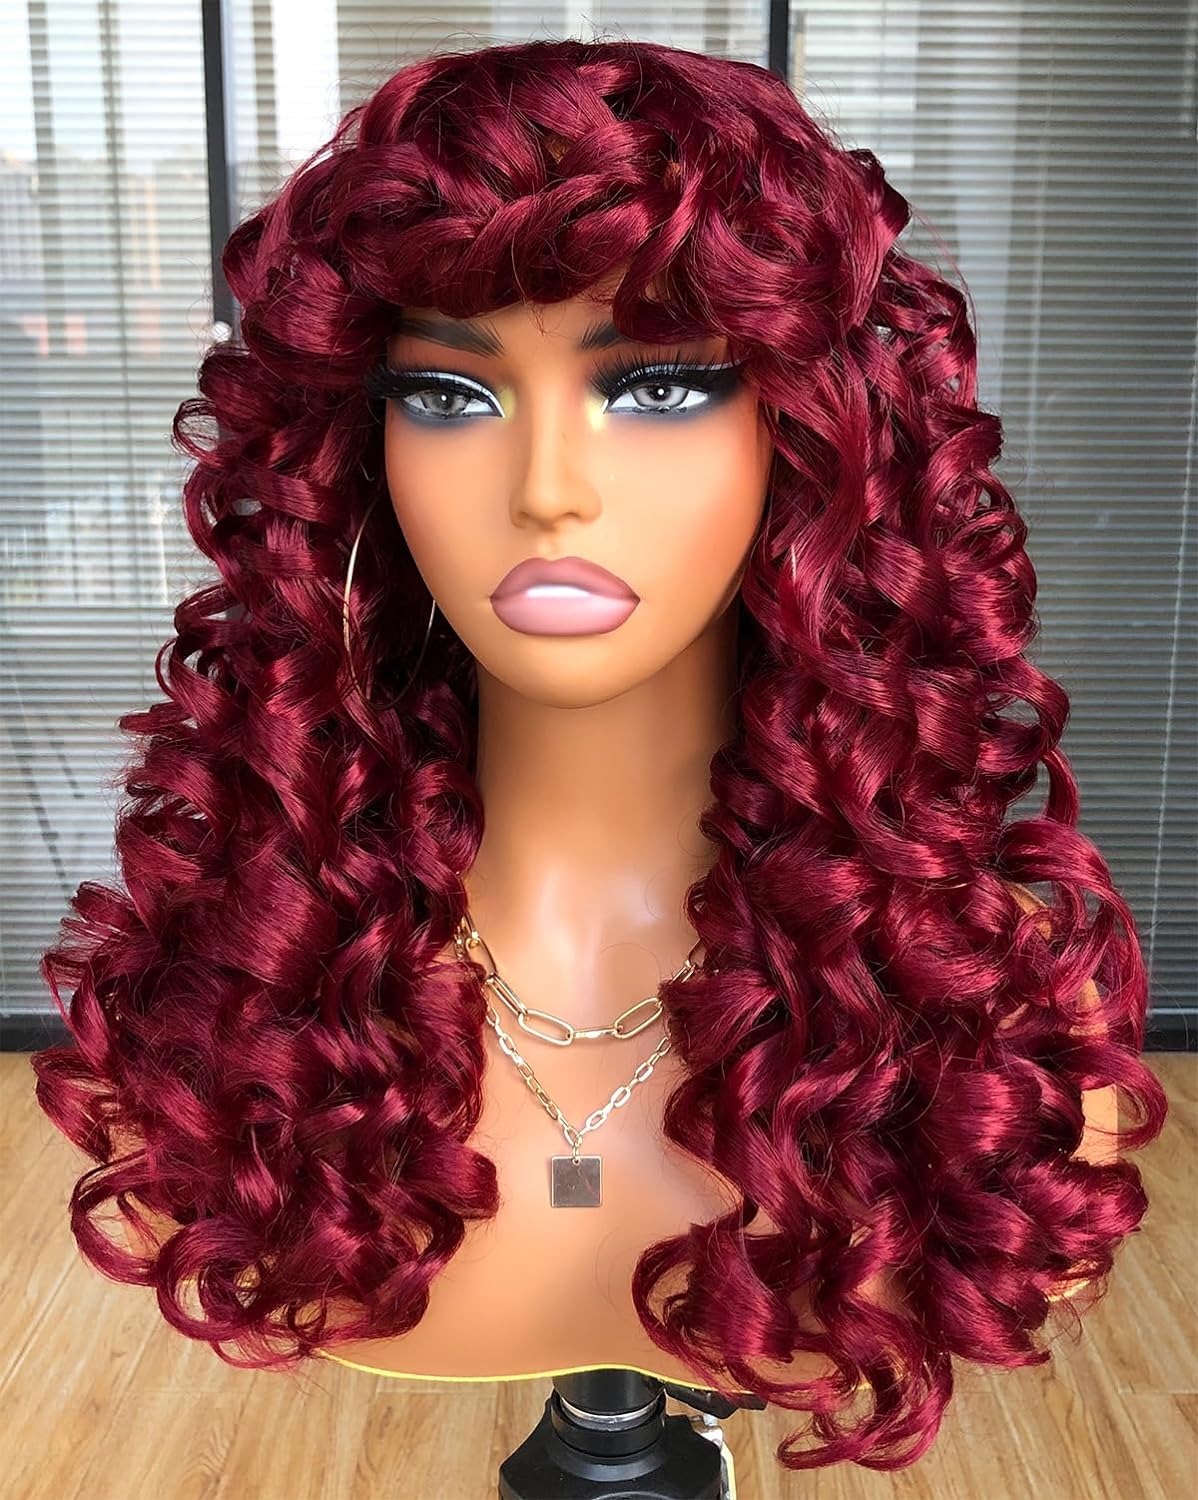 Long Curly Afro Wig with Bangs Big Loose Cute Kinky Curly Hair Synthetic Wig for Daily Use Party Hallowmas Cosplay （Black 17 inch）